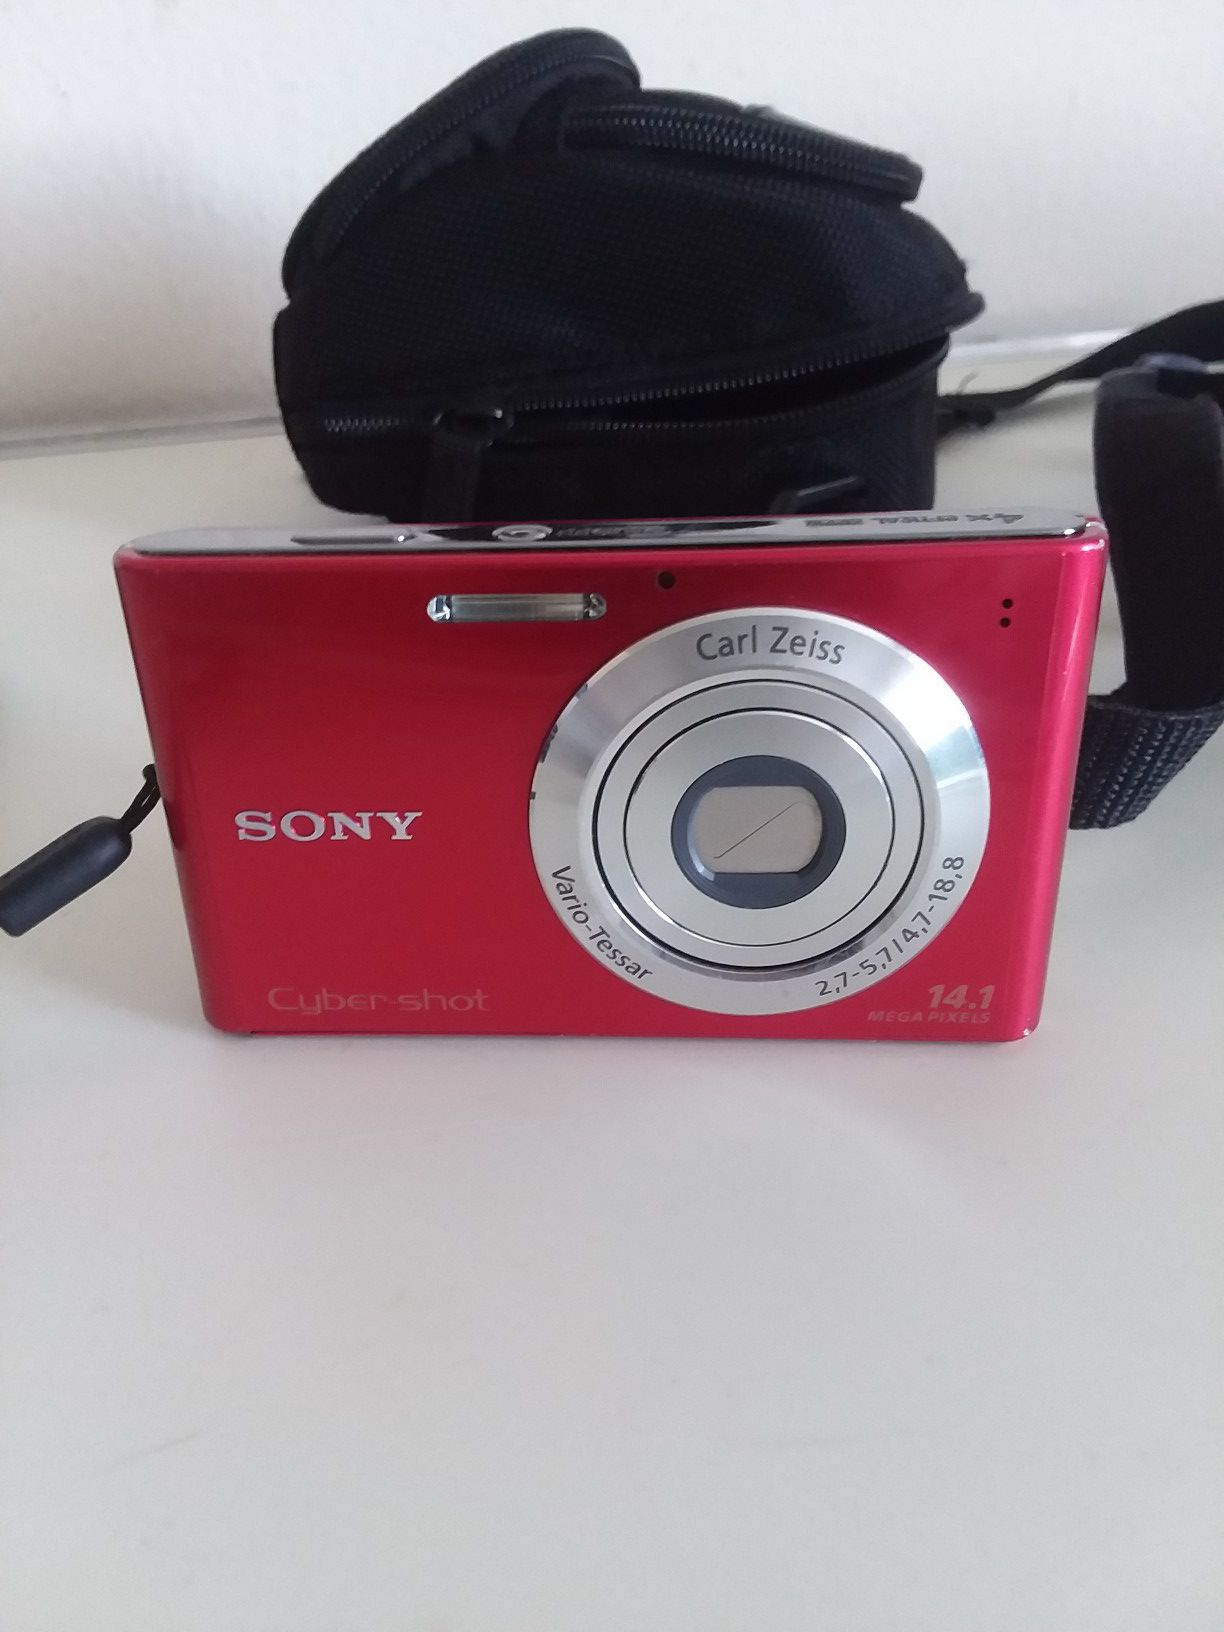 Sony Cyber-shot DSC-W330 camera with 14.1 megapixels red.